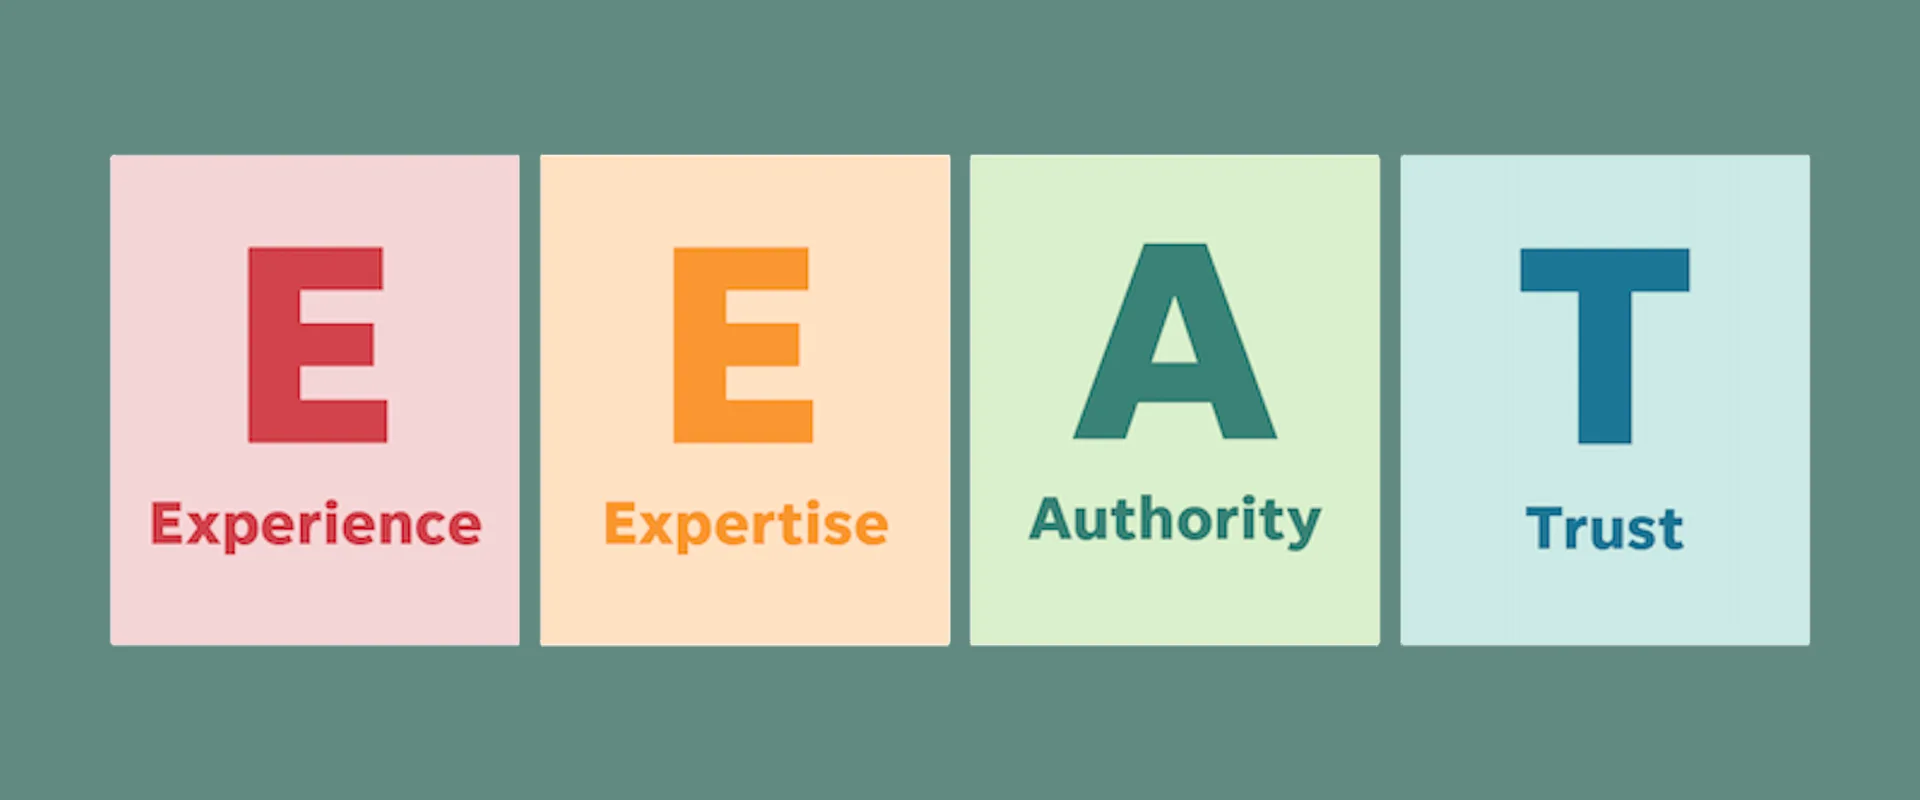 E-E-A-T Experience Expertise Authority Trust